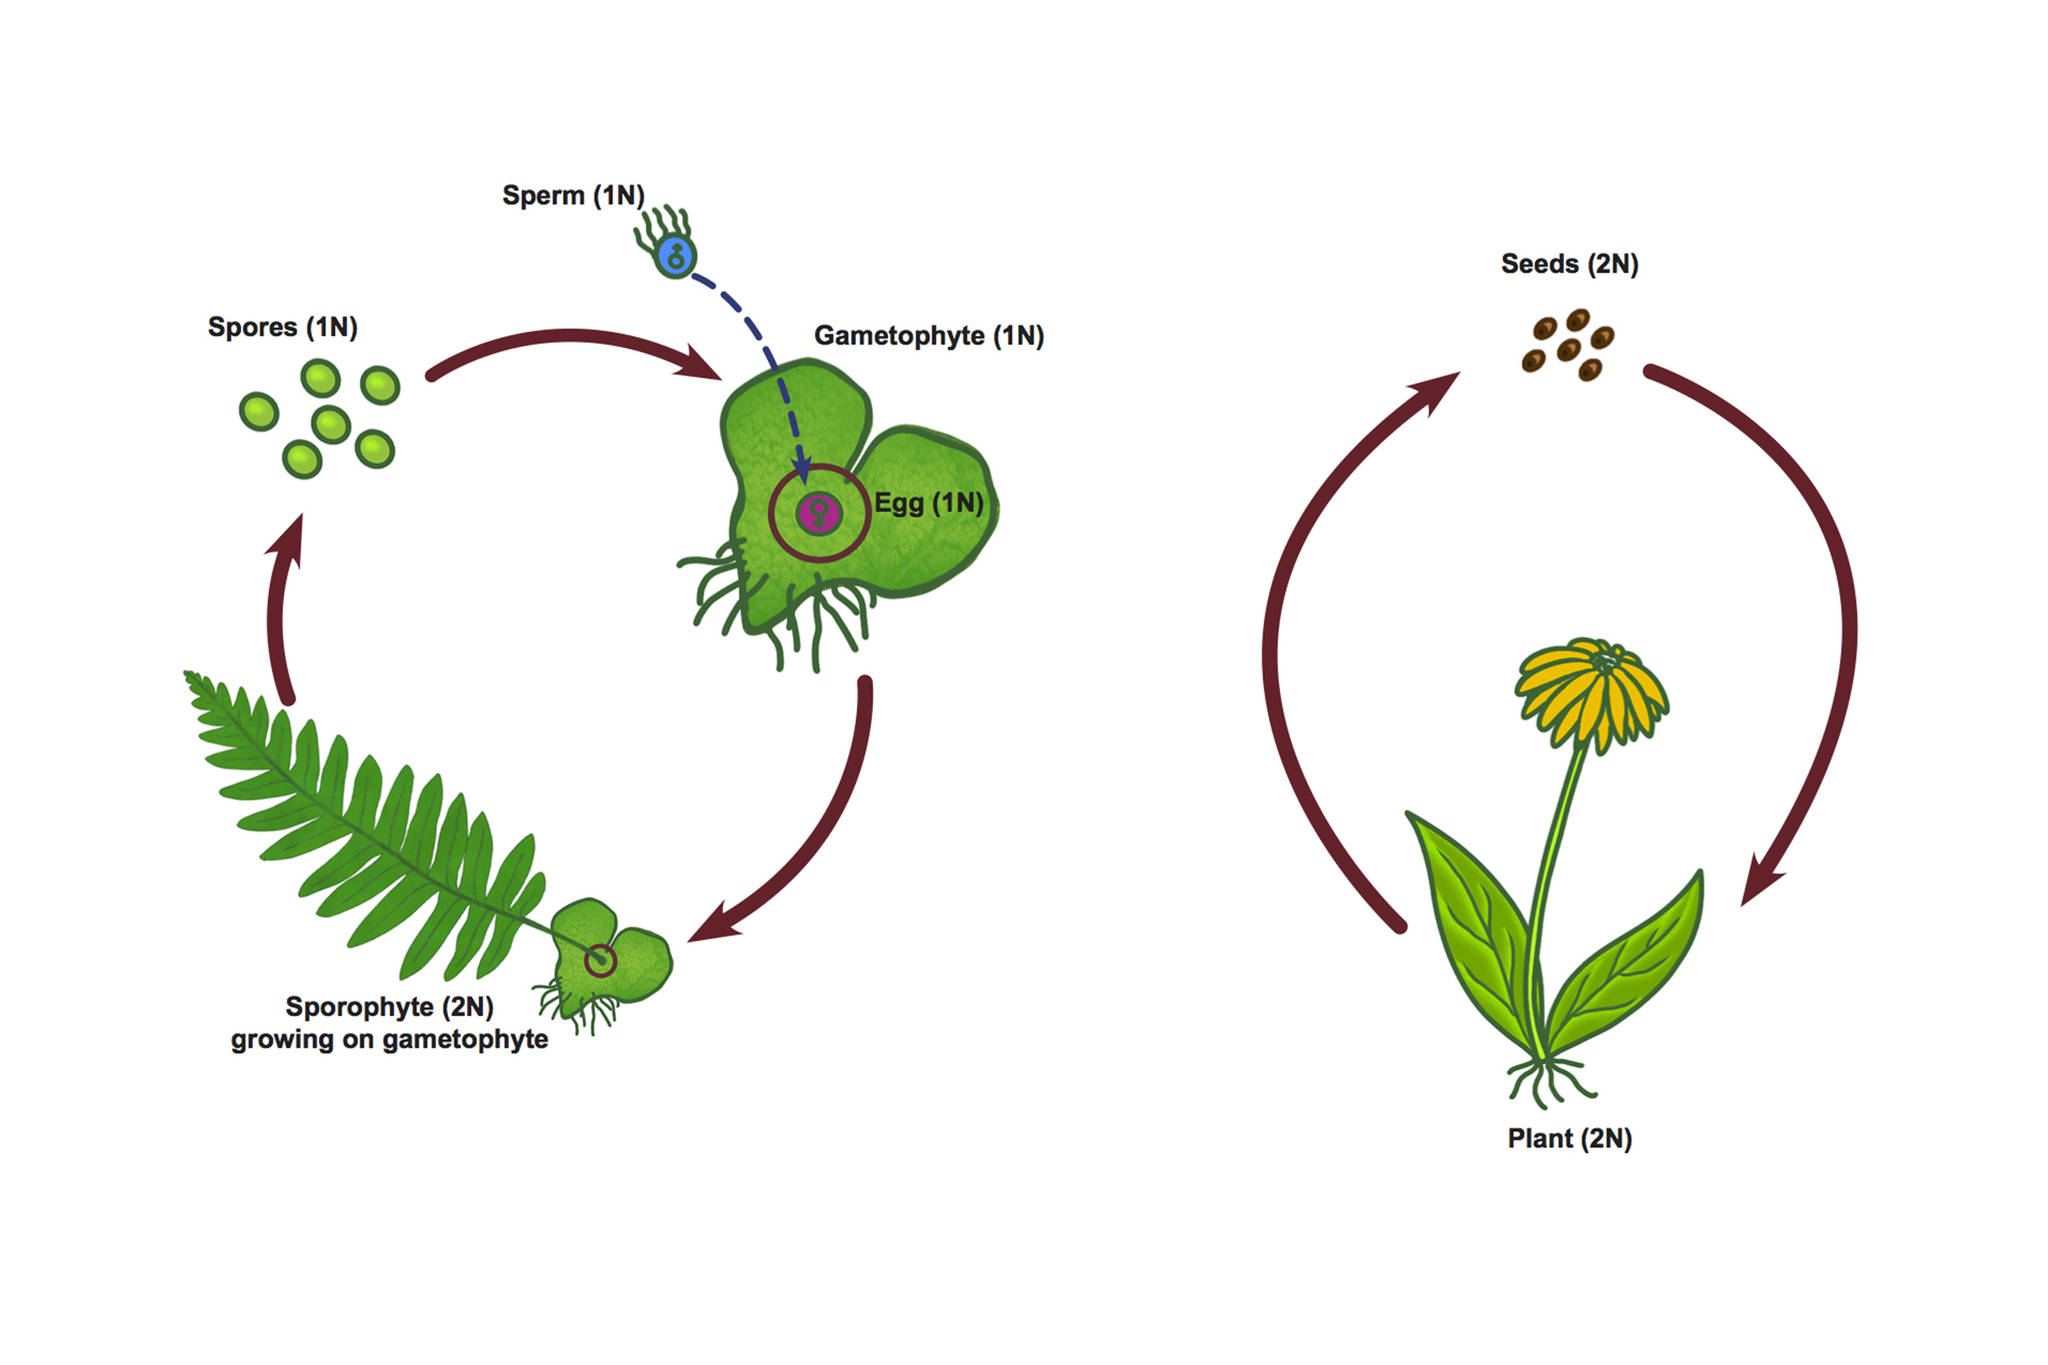 Left side: Mosses and ferns: alternation of sporophyte (2N) and gametophyte (1N) generations. Sperm swim to reach eggs on gametophytes. Right side: Seed plants: female gametophyte and its egg (1N) not independent, but enclosed in developing seed (2N, after pollination) on parent plant (2N). (Courtesy Image / Kathy Hocker)